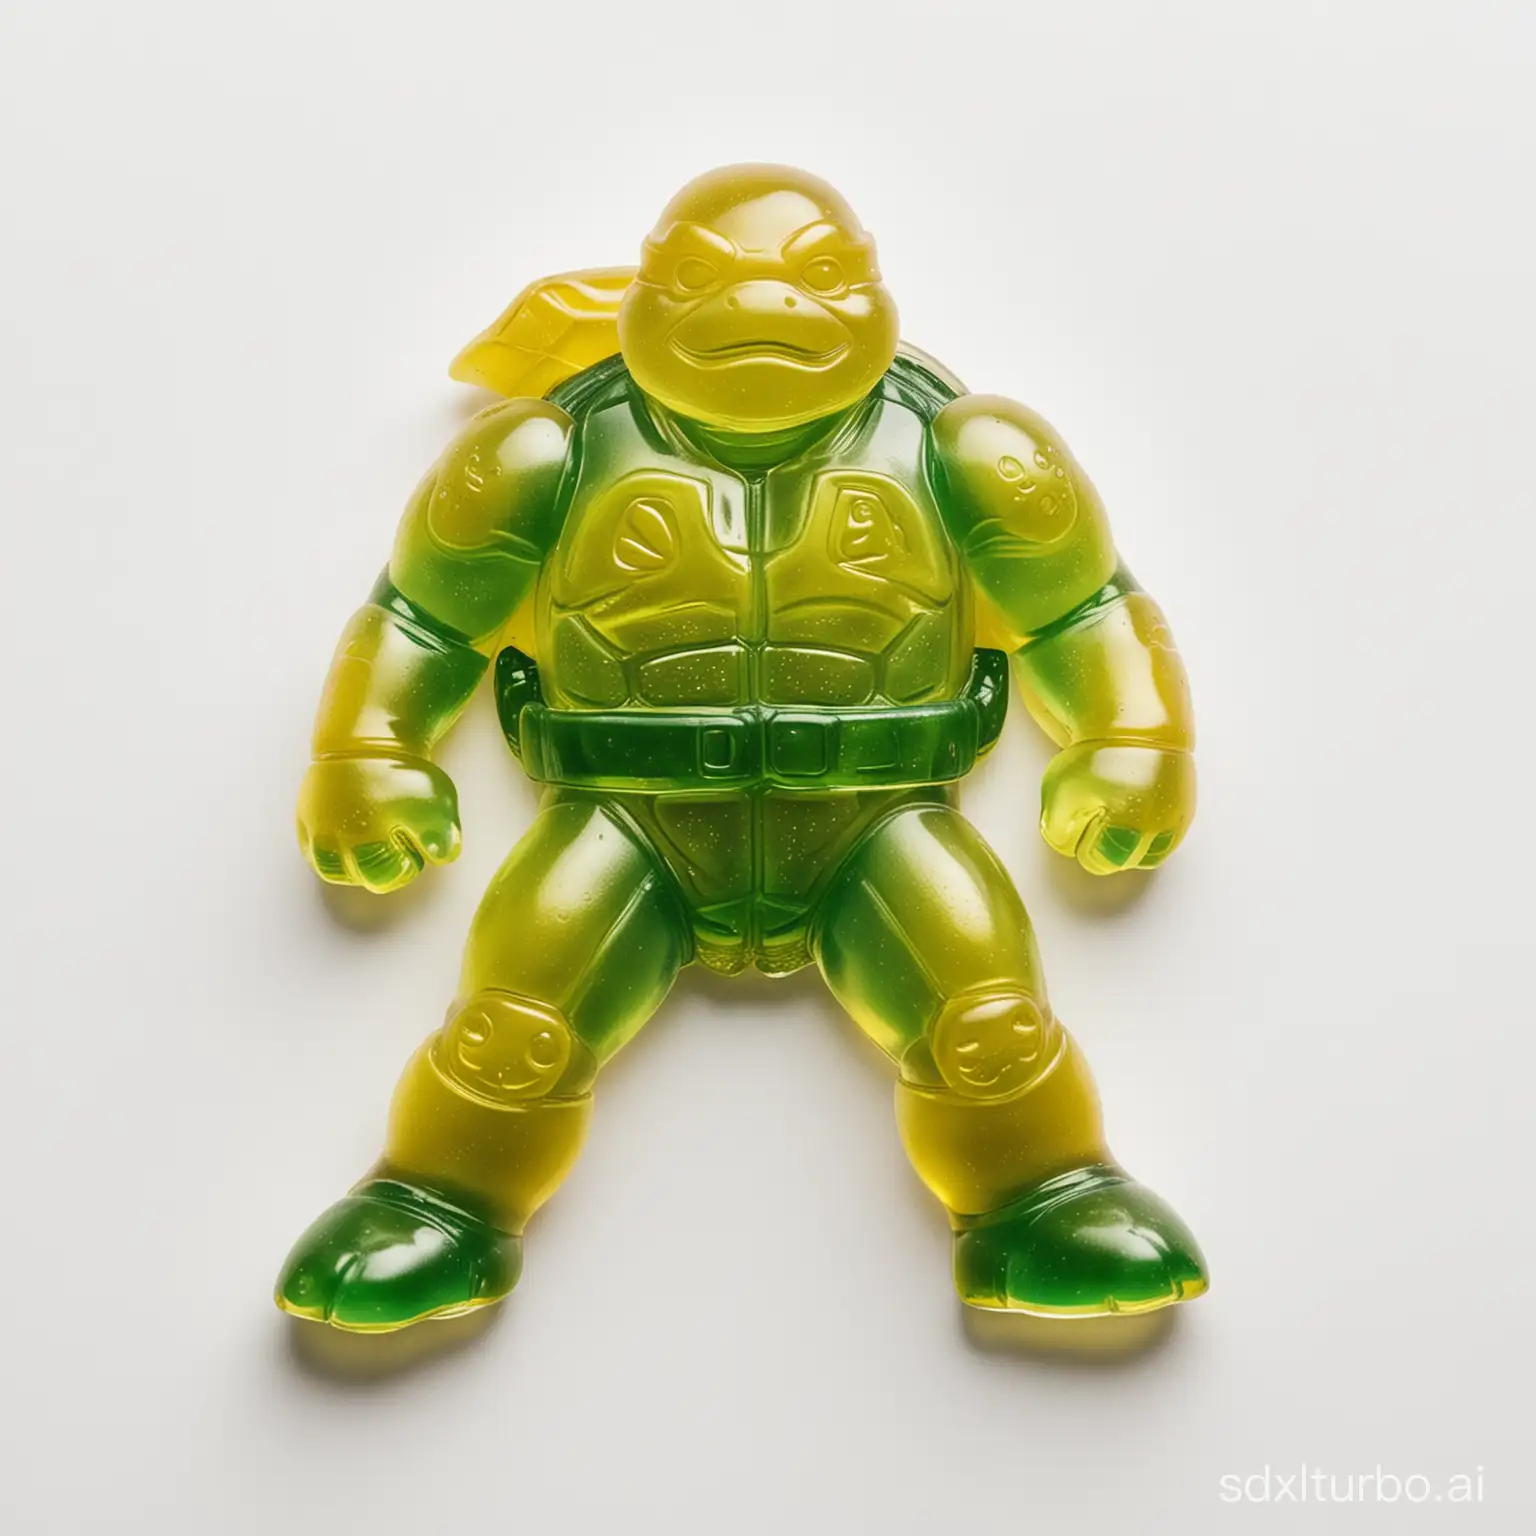 TopDown-View-of-Green-and-Yellow-Teenage-Mutant-Ninja-Turtle-Gummy-on-White-Background